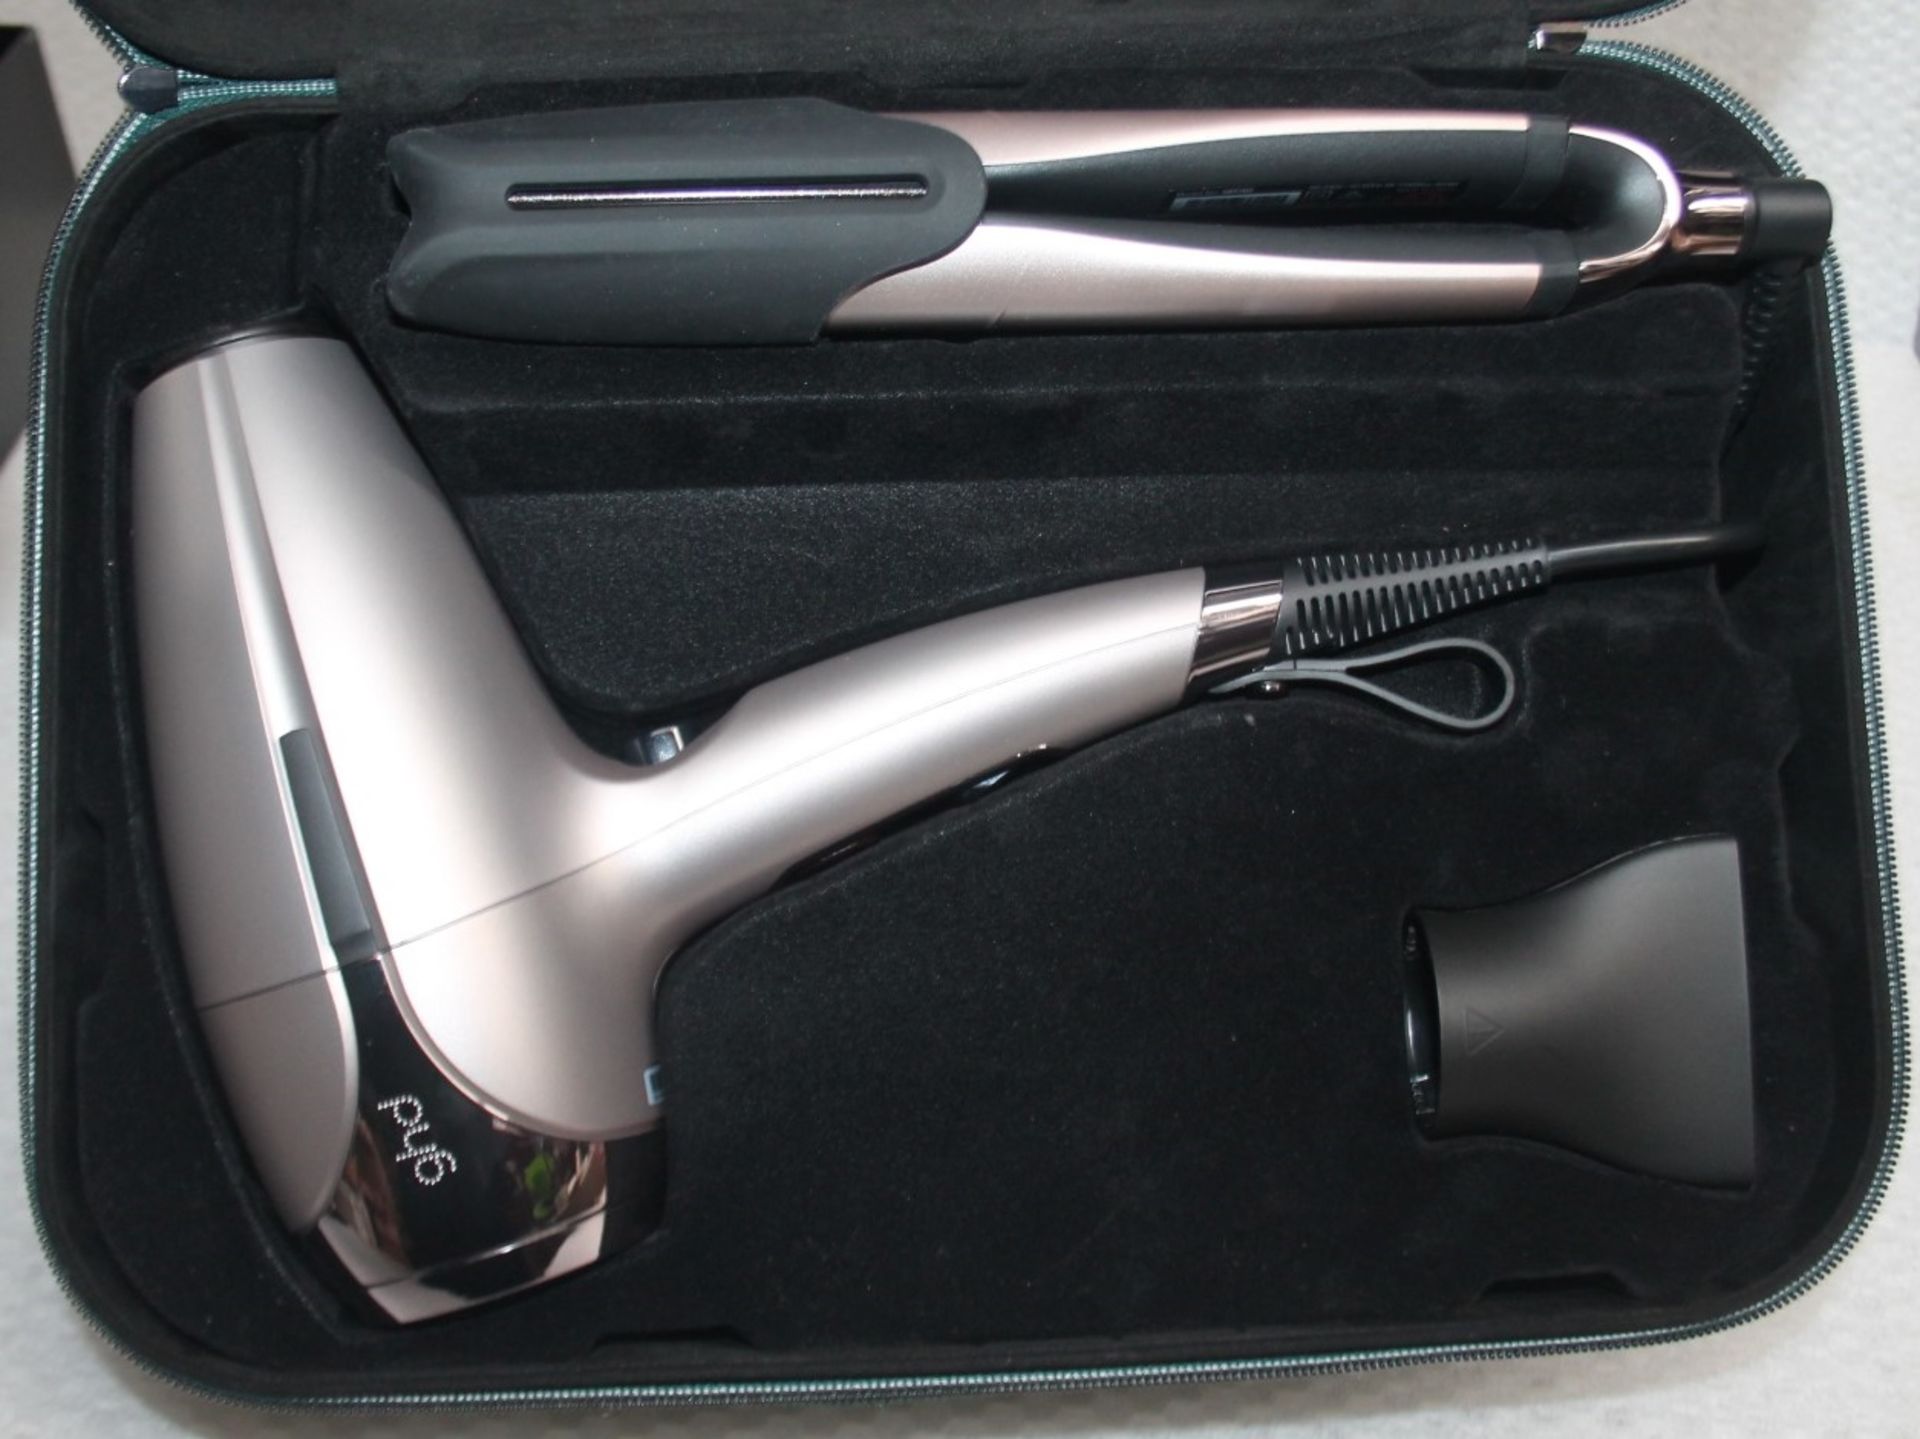 1 x GHD Platinum+ Styler & Helios Hair Dryer Gift Set With Green Case - Original Price £368.00 - Image 2 of 9